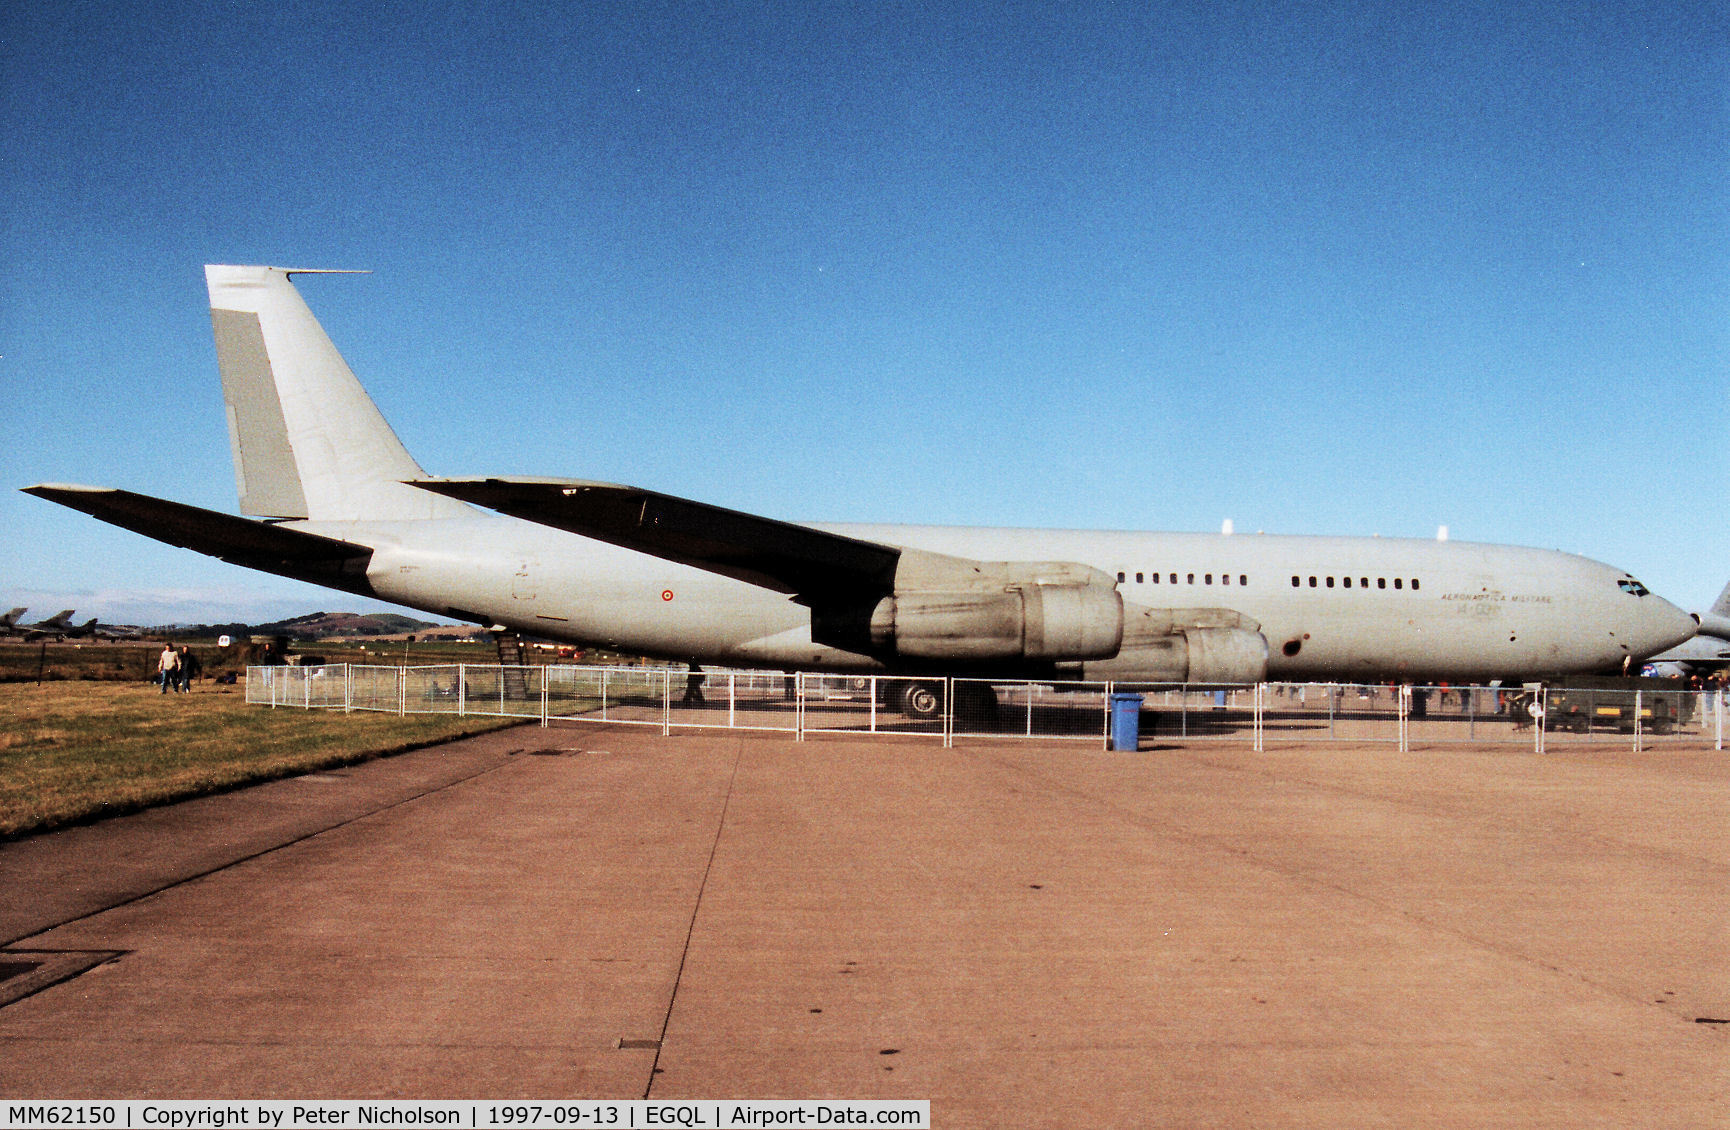 MM62150, 1971 Boeing 707-3F5C(KC) C/N 20514, Another view of the Boeing 707 of 14 Stormo Italian Air Force on display at the 1997 RAF Leuchars Airshow.